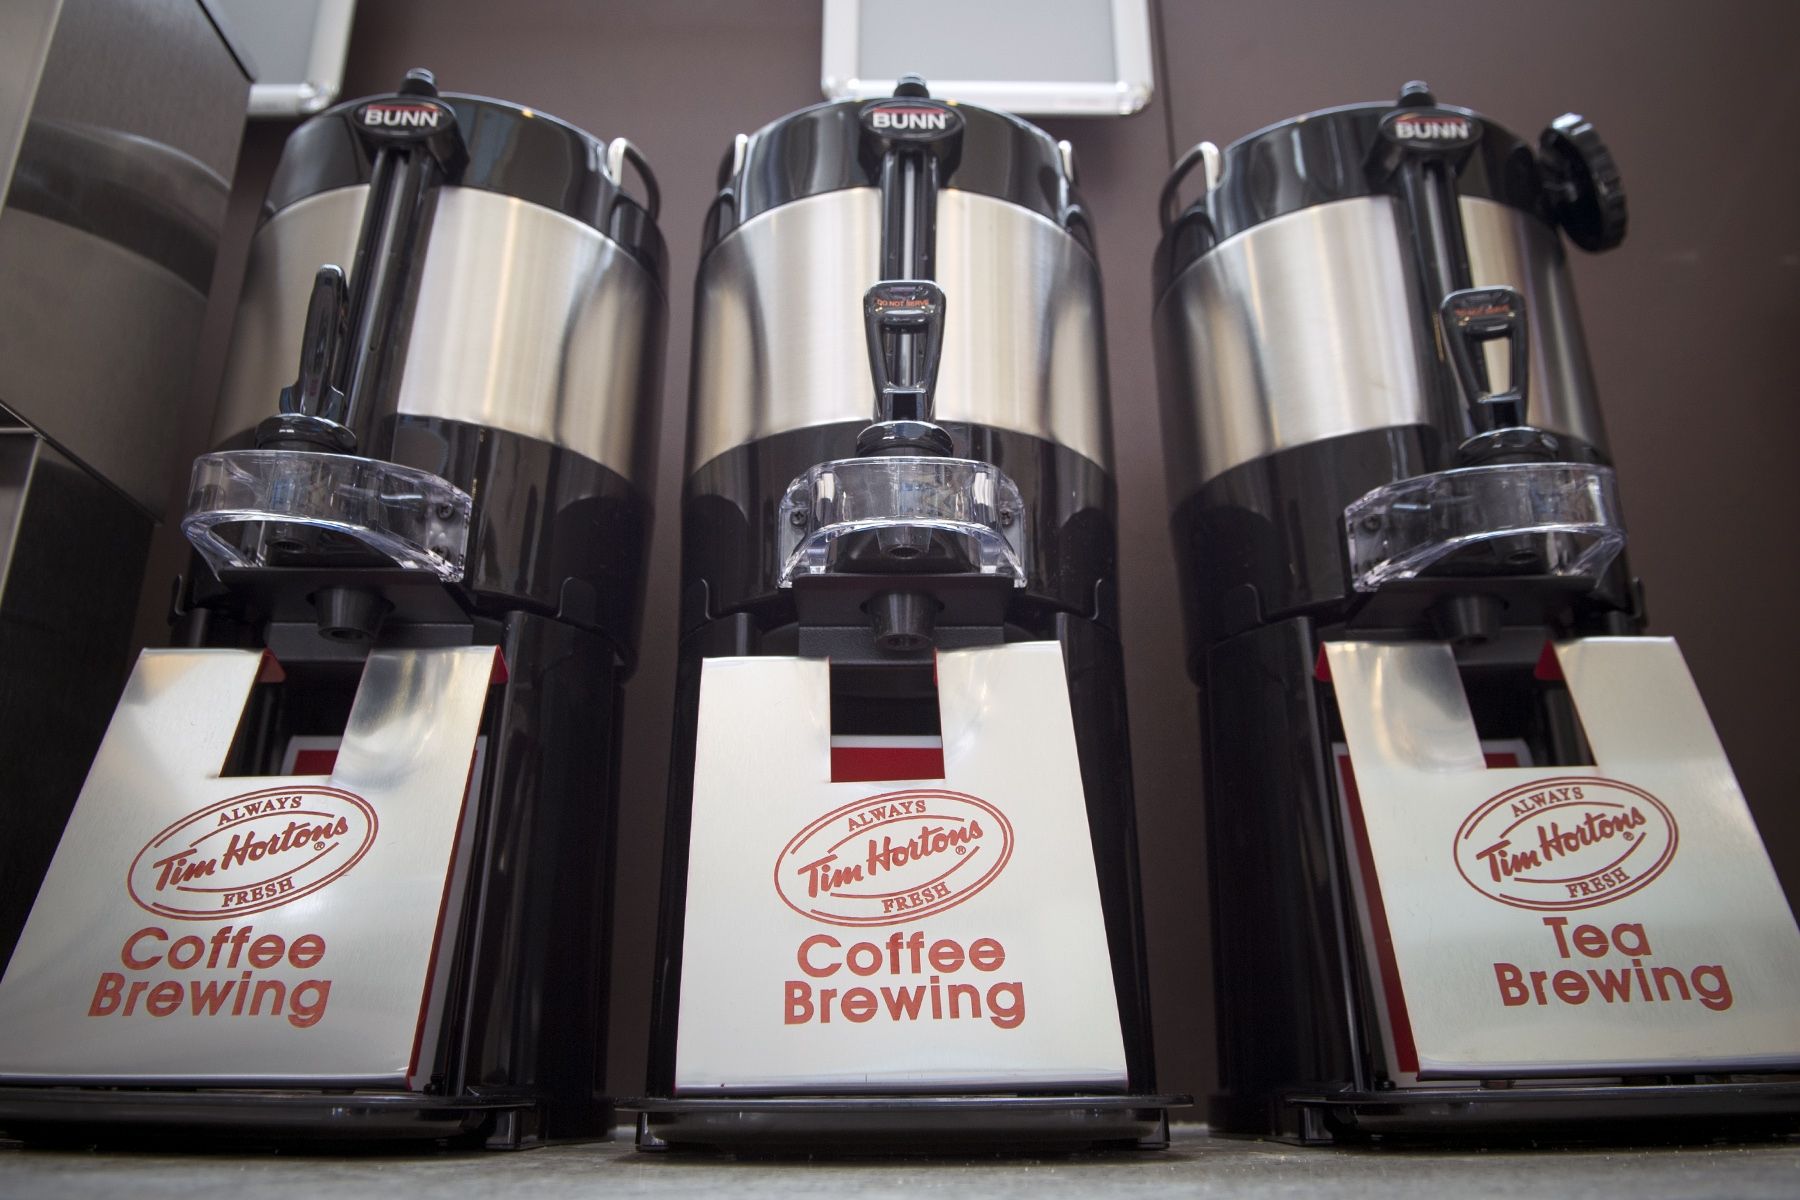 Tim Hortons coffee, tea and capuccino is now served in the Burr wing